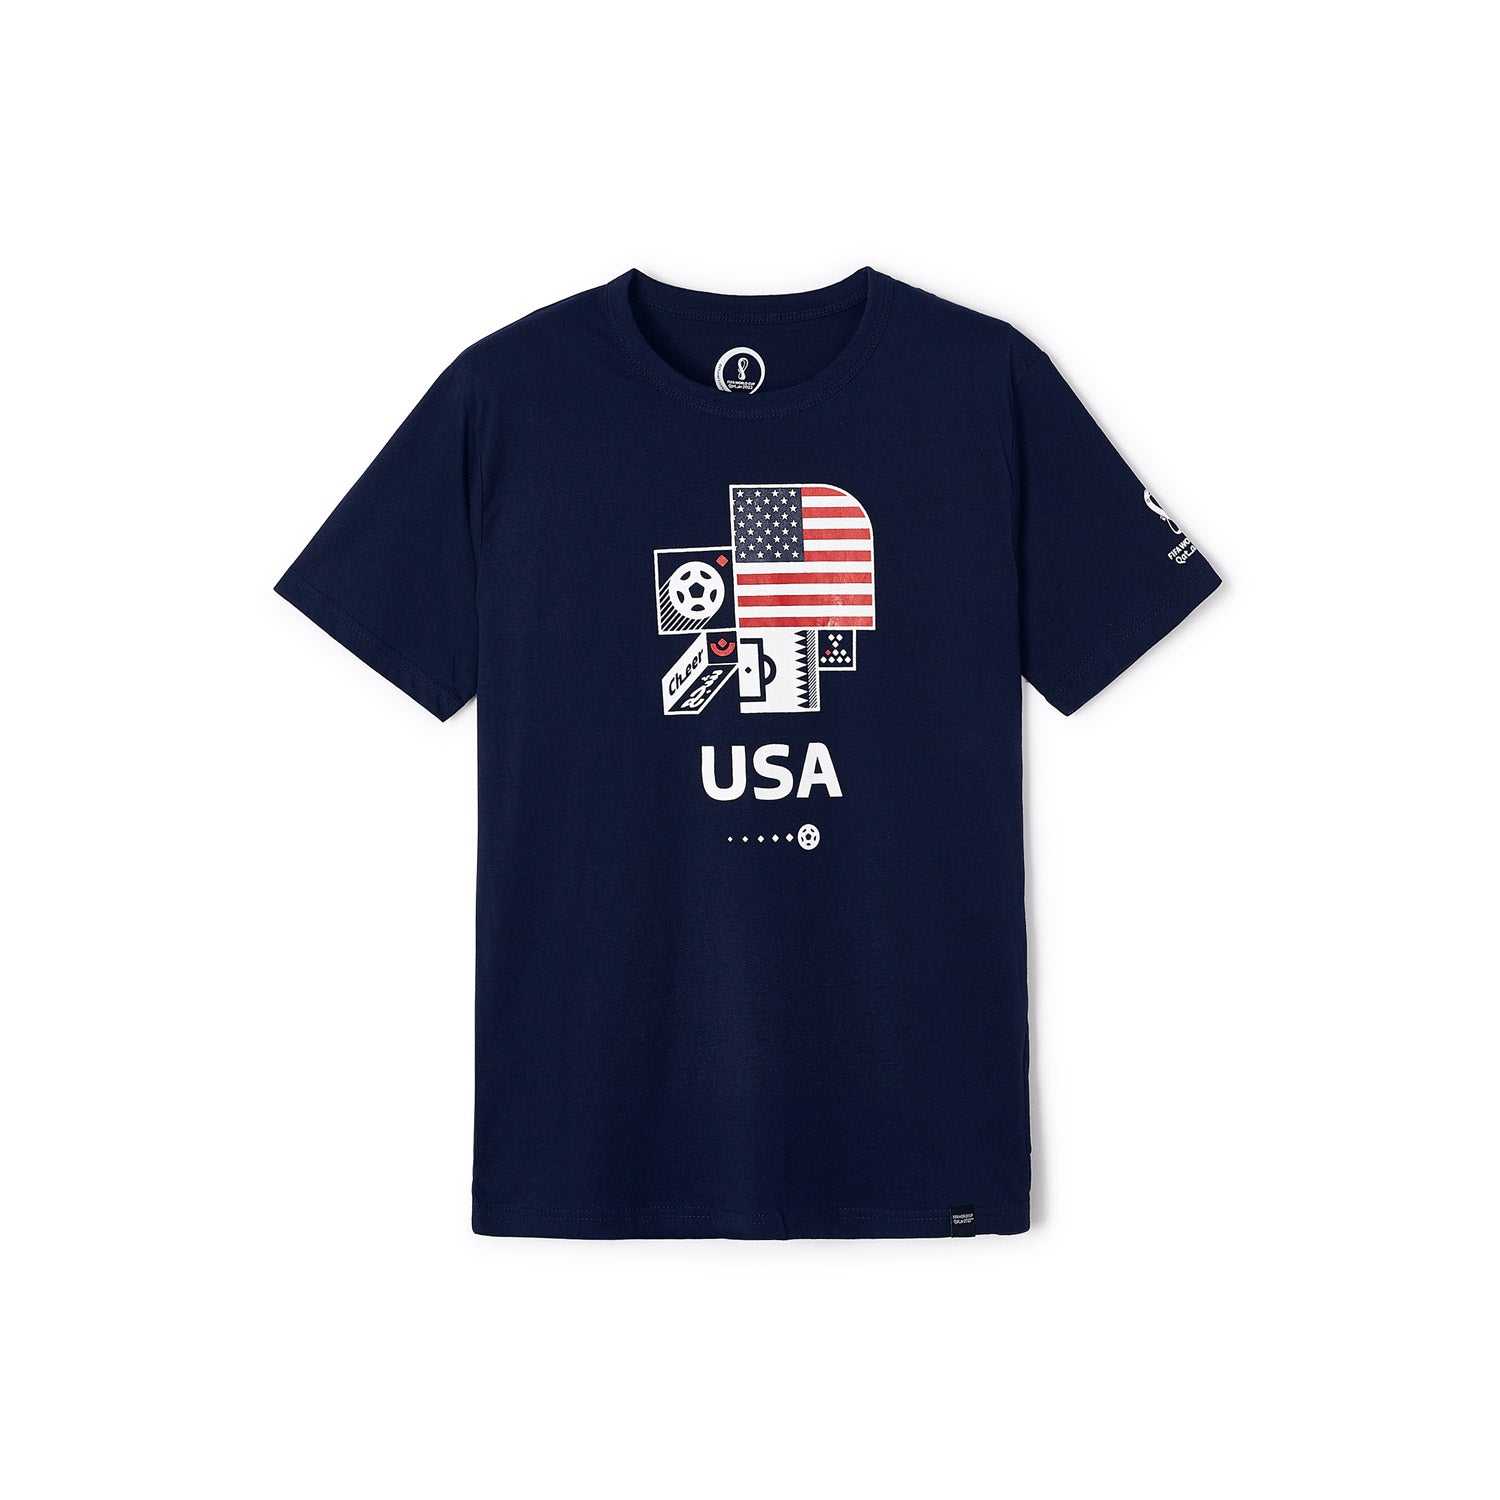 2022 World Cup USA Blue T-Shirt - Youth